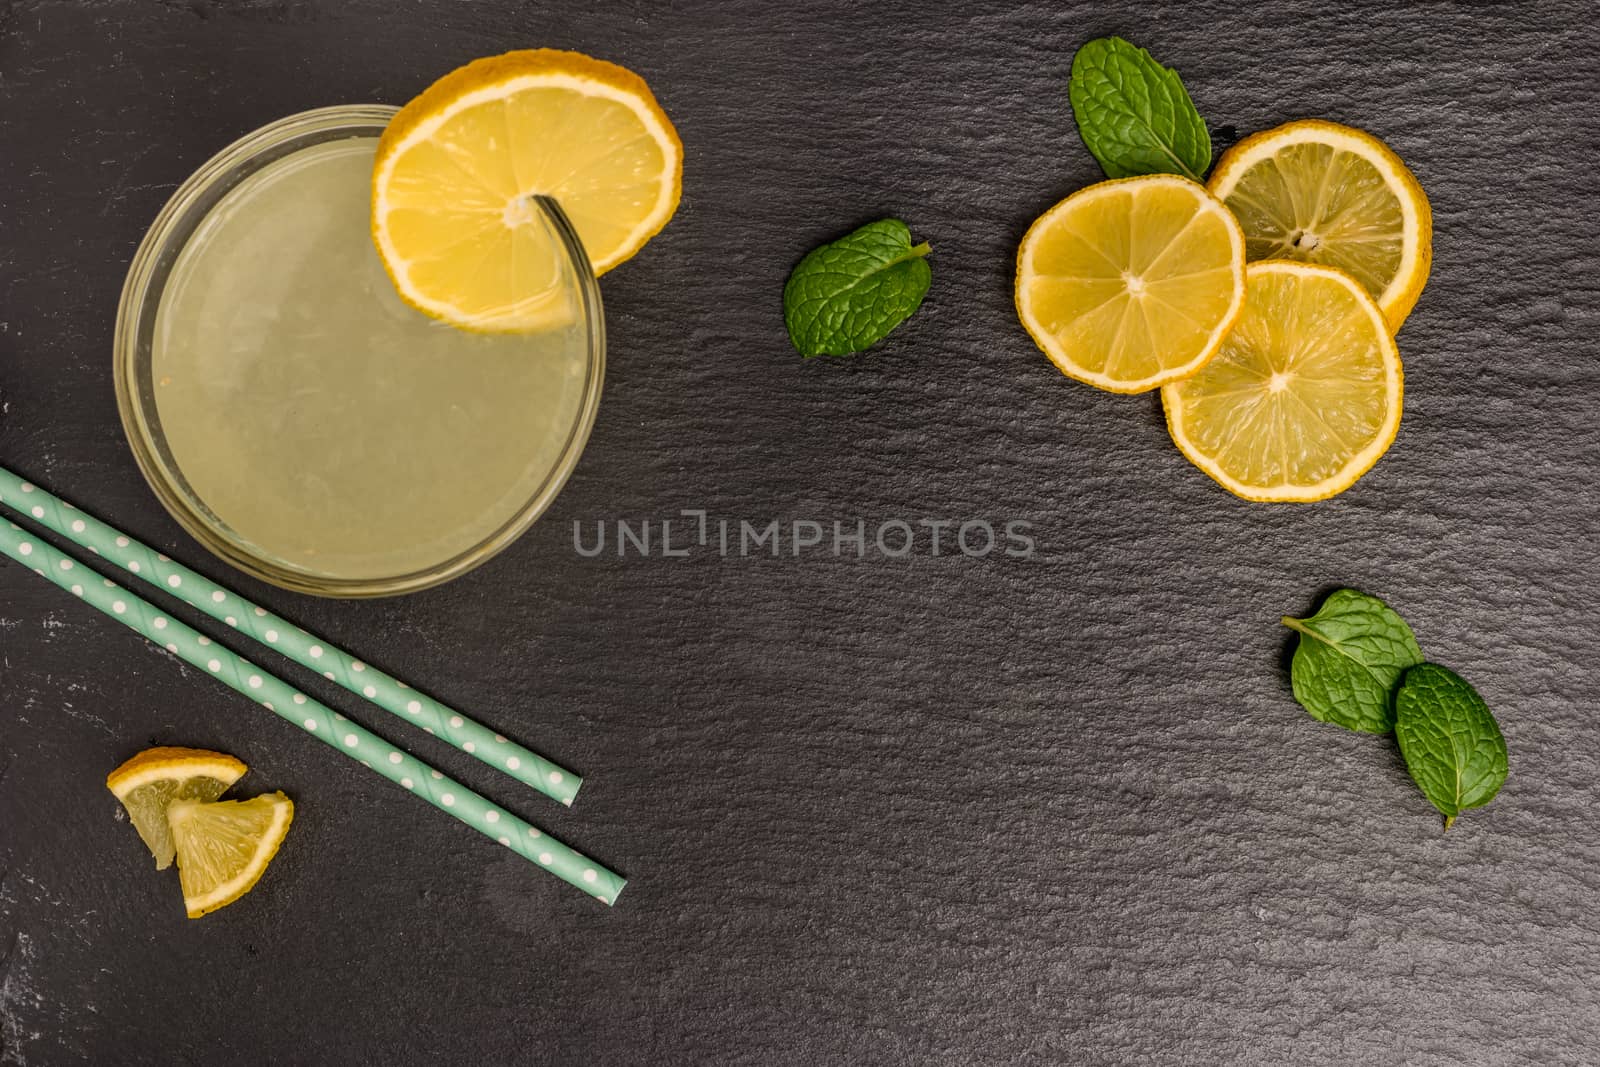 Glass of homemade lemonade with mint and lemon wedges on slate. Top view with copy space.